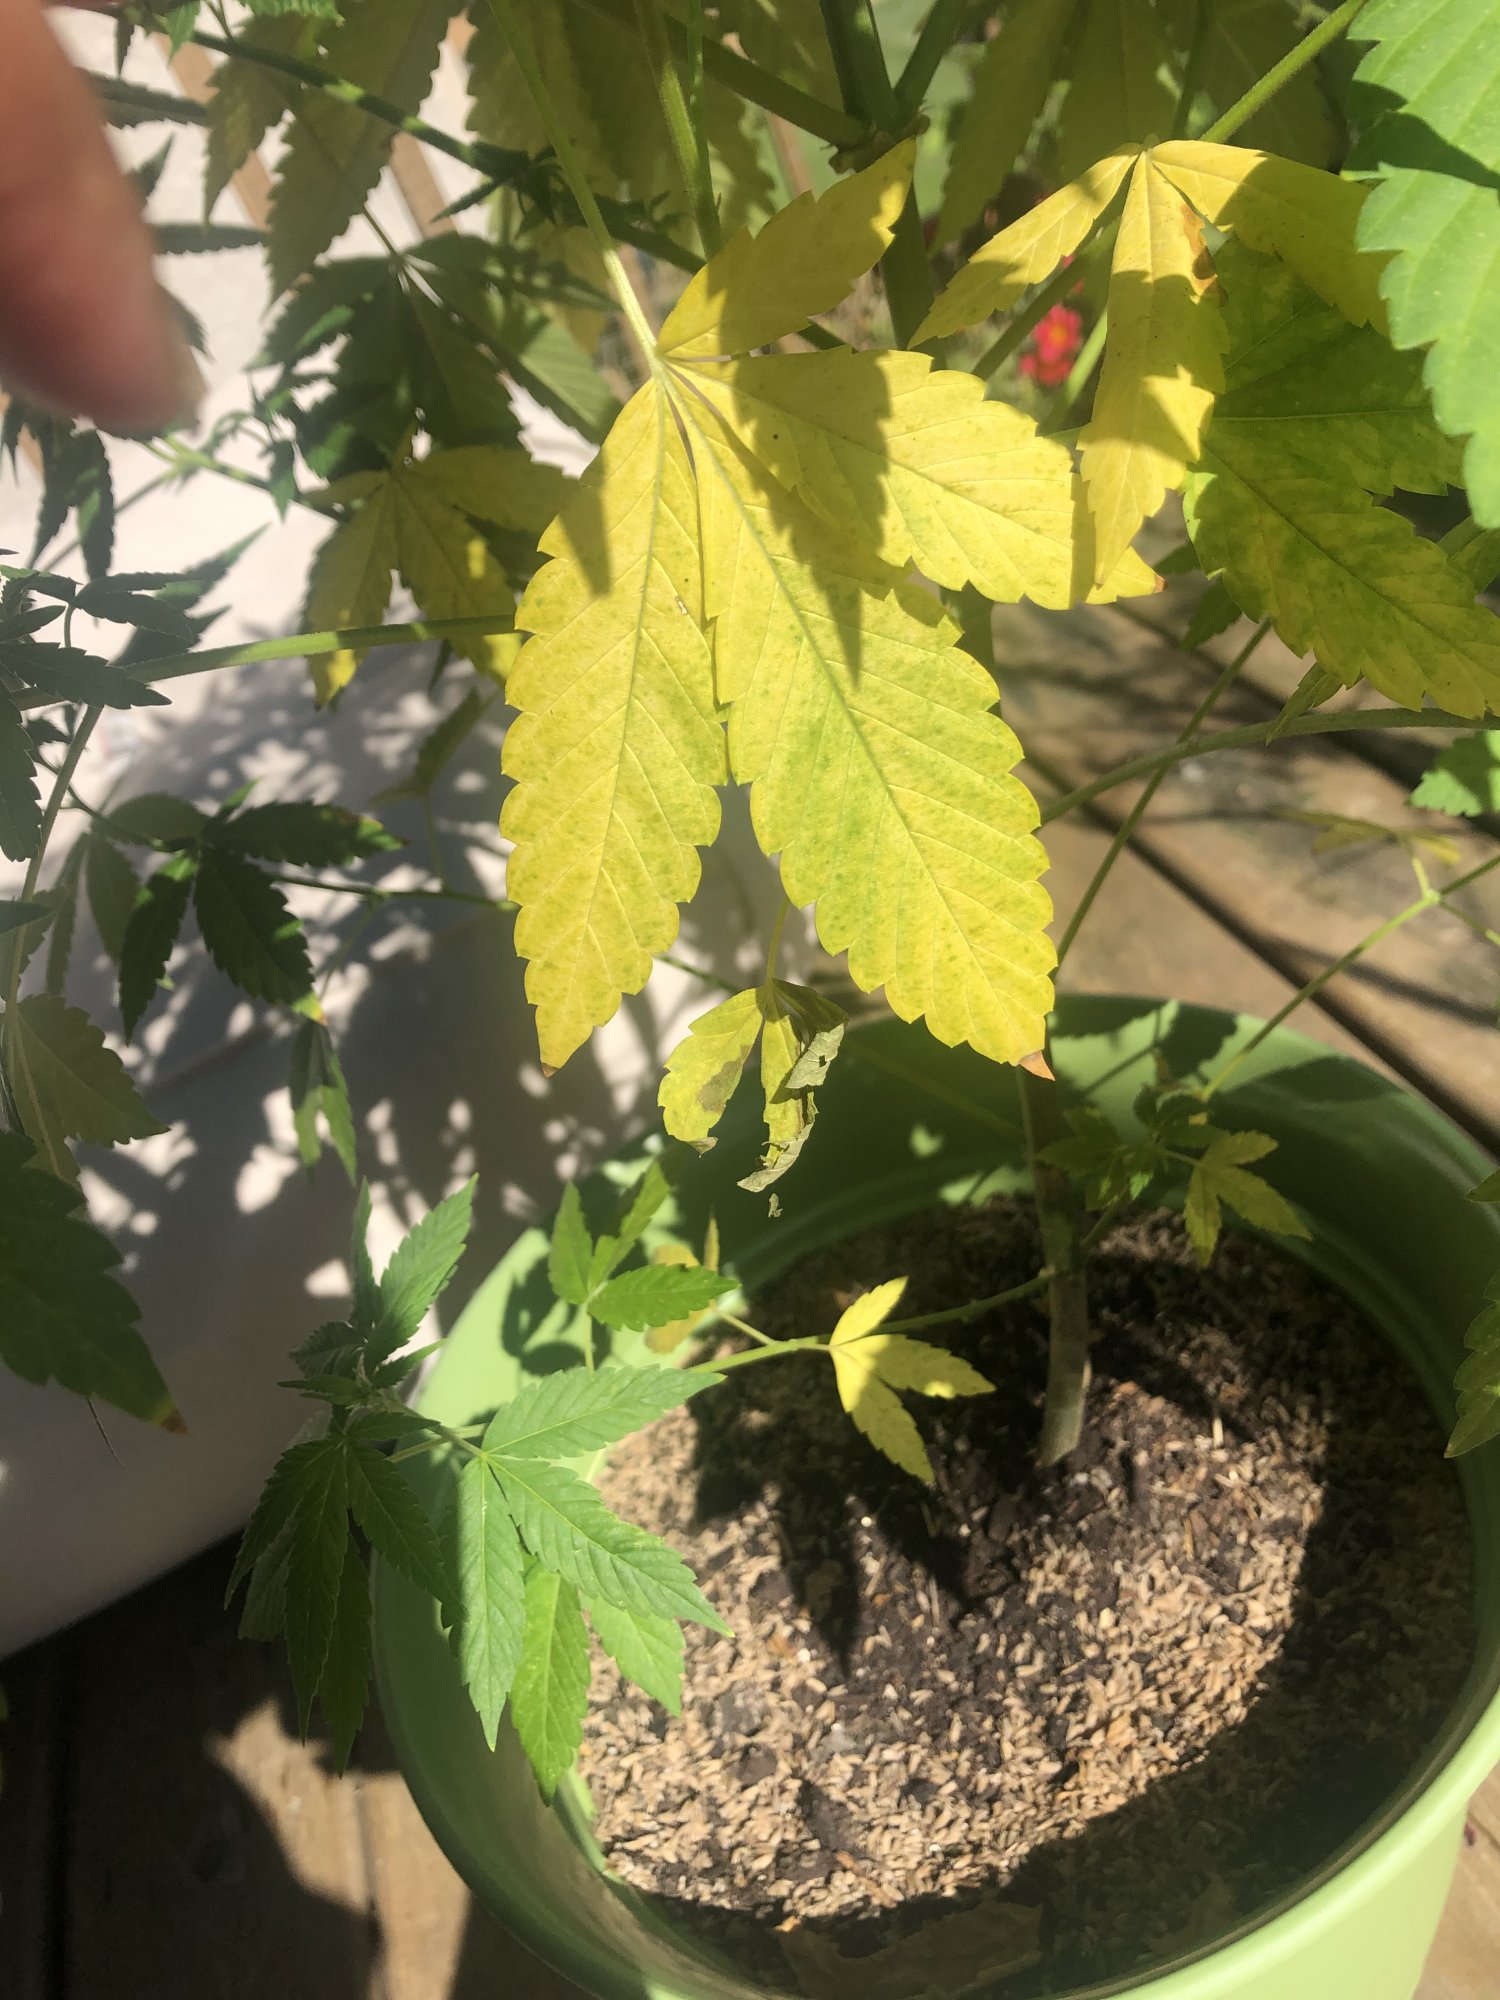 Yellowing leaves on my outdoor plant 3